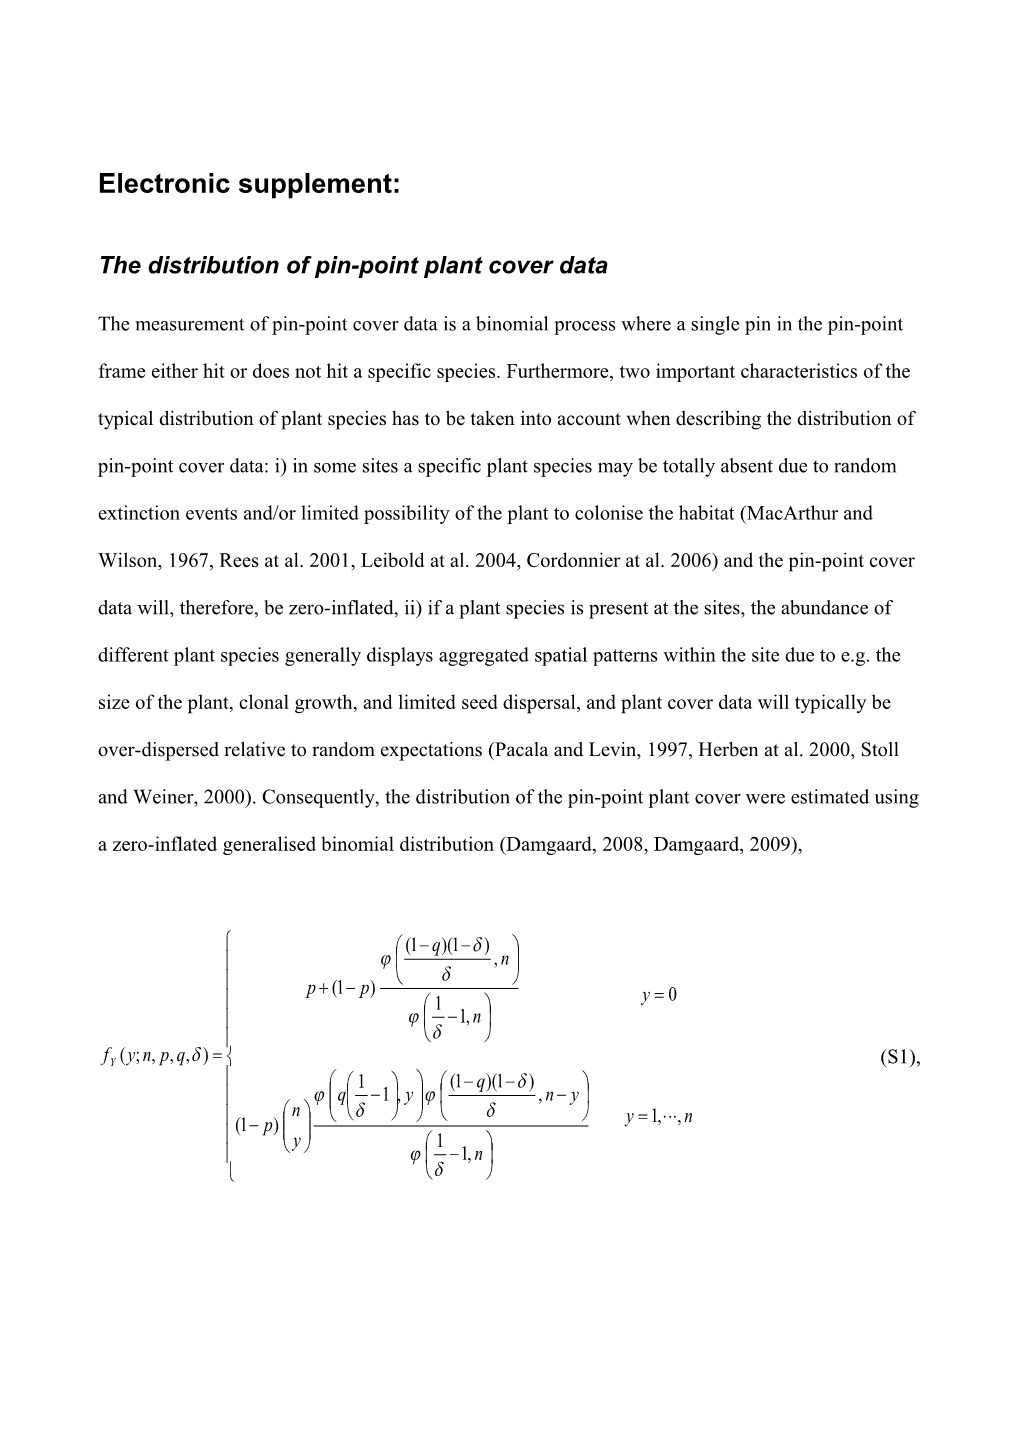 Appendix: Trend Analysis and the Distribution of Pin-Point Plant Cover Data